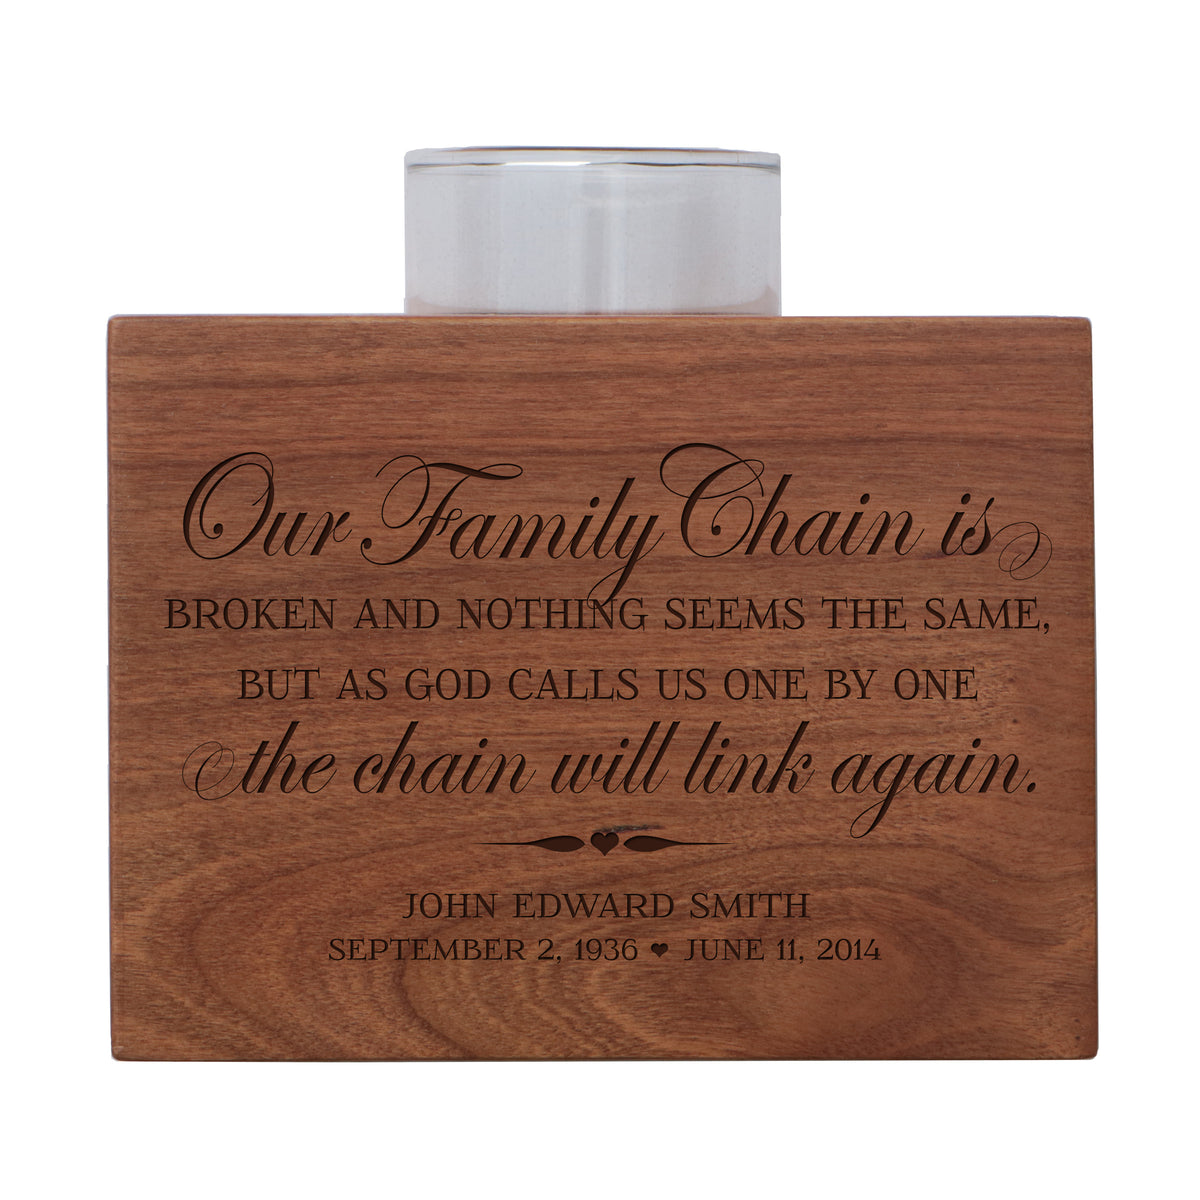 Personalized Memorial sympathy votive candle holder cherry wood keepsake gift ideas for Loved One 3.75” x 3.75” x 2.75” by LifeSong Milestones